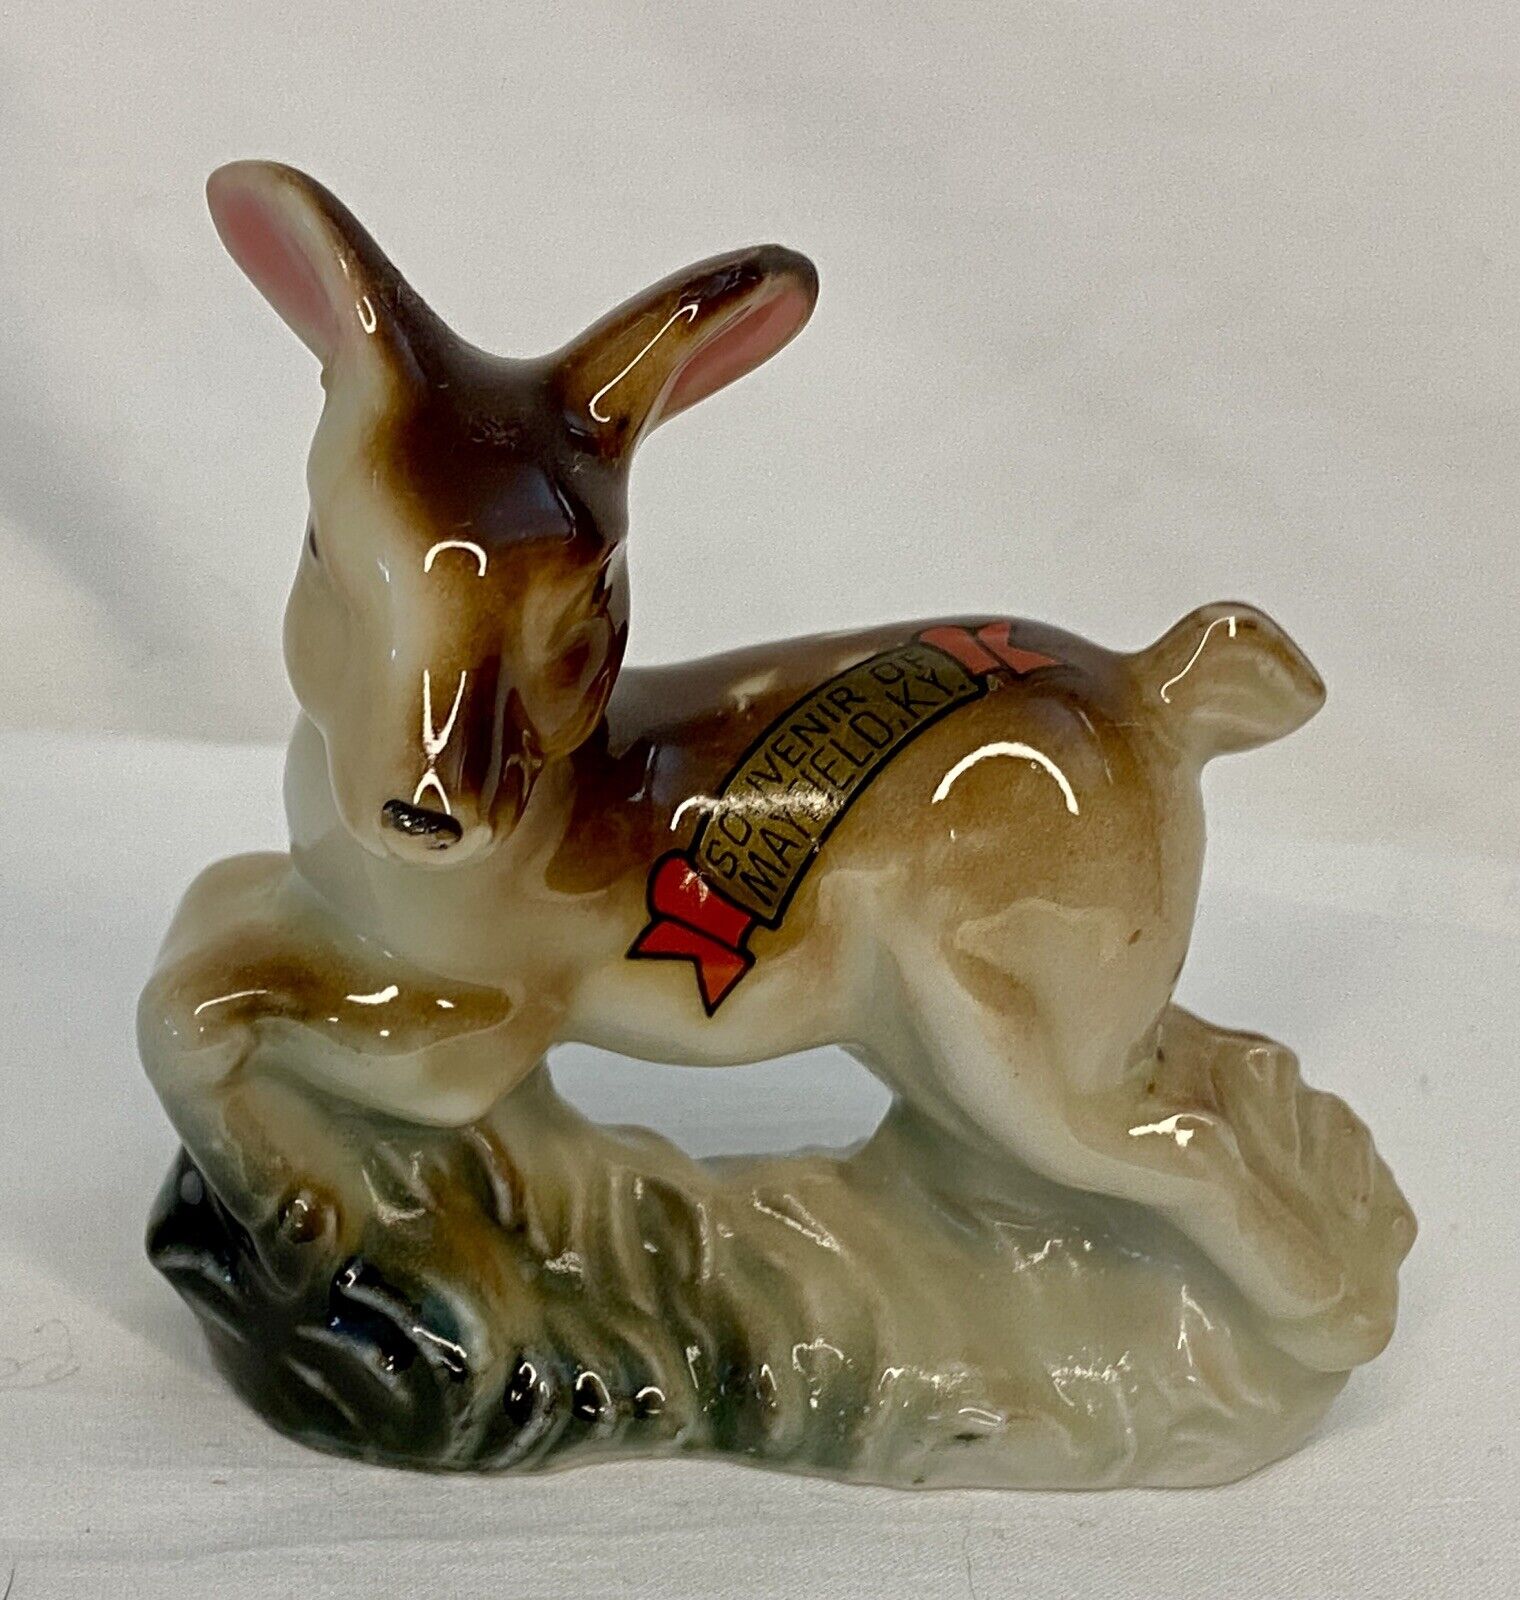 Vintage Miniature Porcelain Fawn Deer Figurine Laying Down Japan Mayfield KY